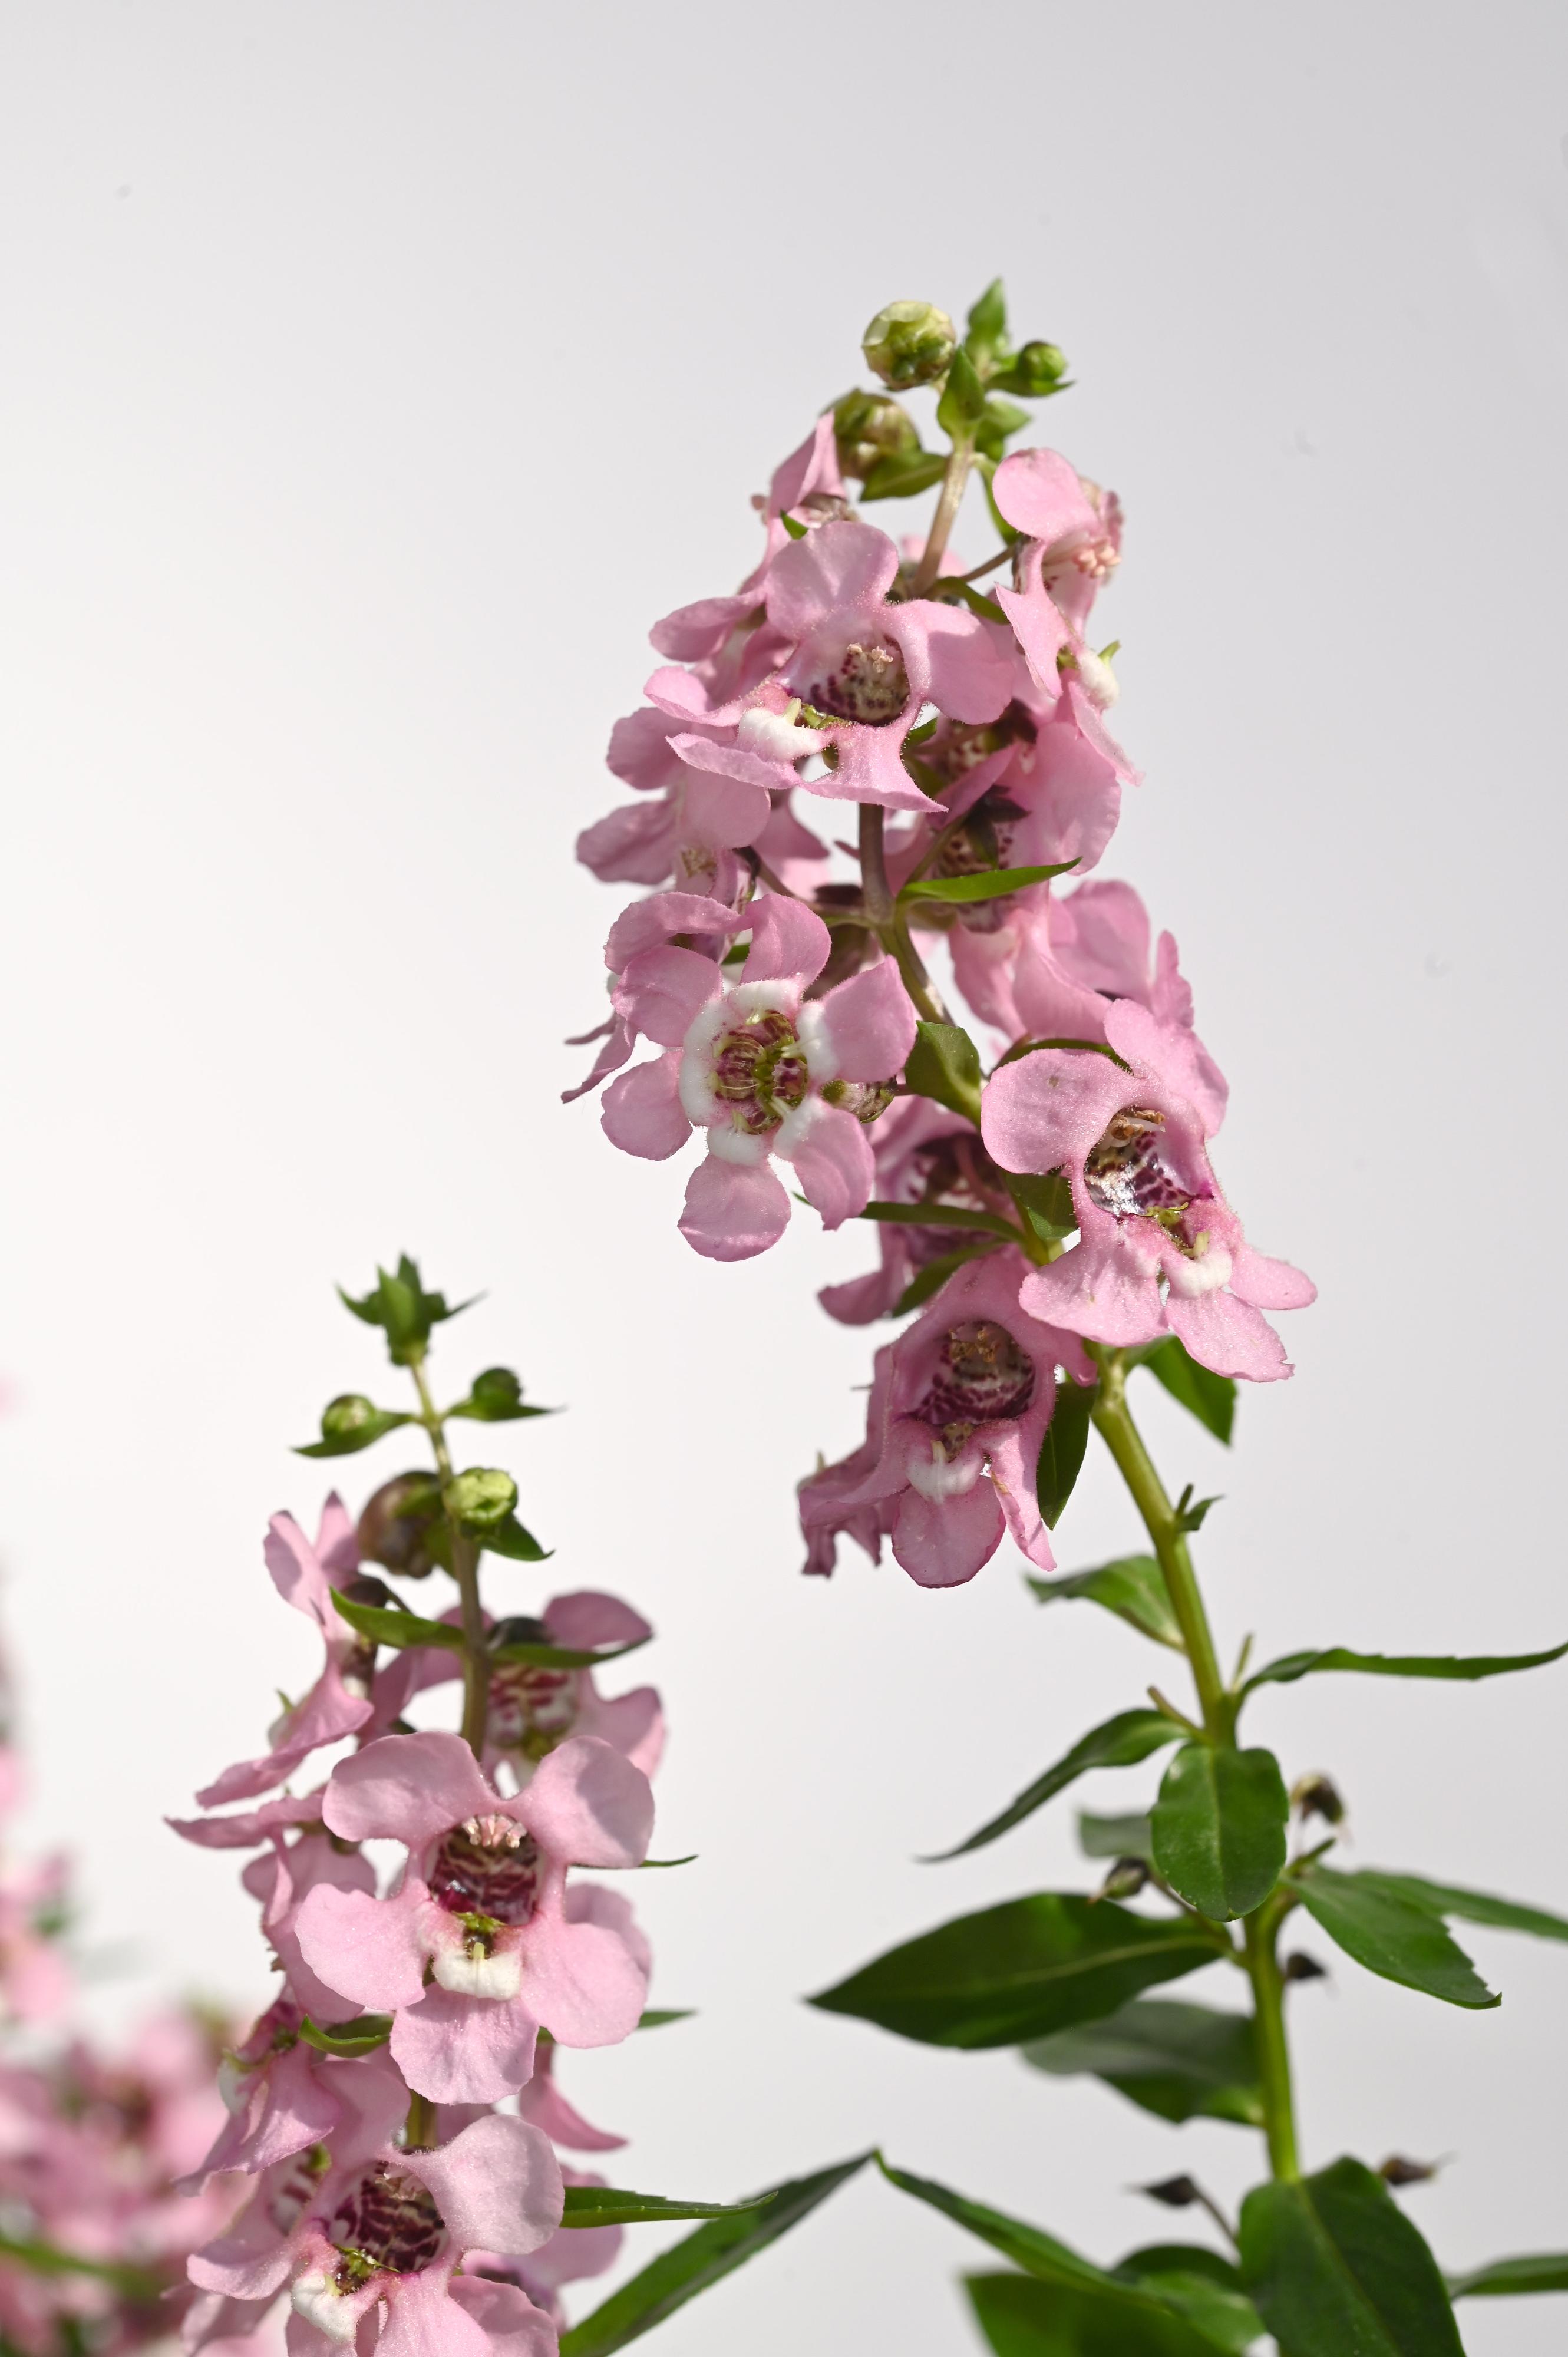 The Hong Kong Flower Show will be held at Victoria Park for 10 days from March 15 to 24, featuring the colourful angelonia as the theme flower and "Floral Joy Around Town" as the main theme. Angelonia has a wide range of hues. Common colours include pure white, pinkish red, light purple, purple and two-tone stripes.
